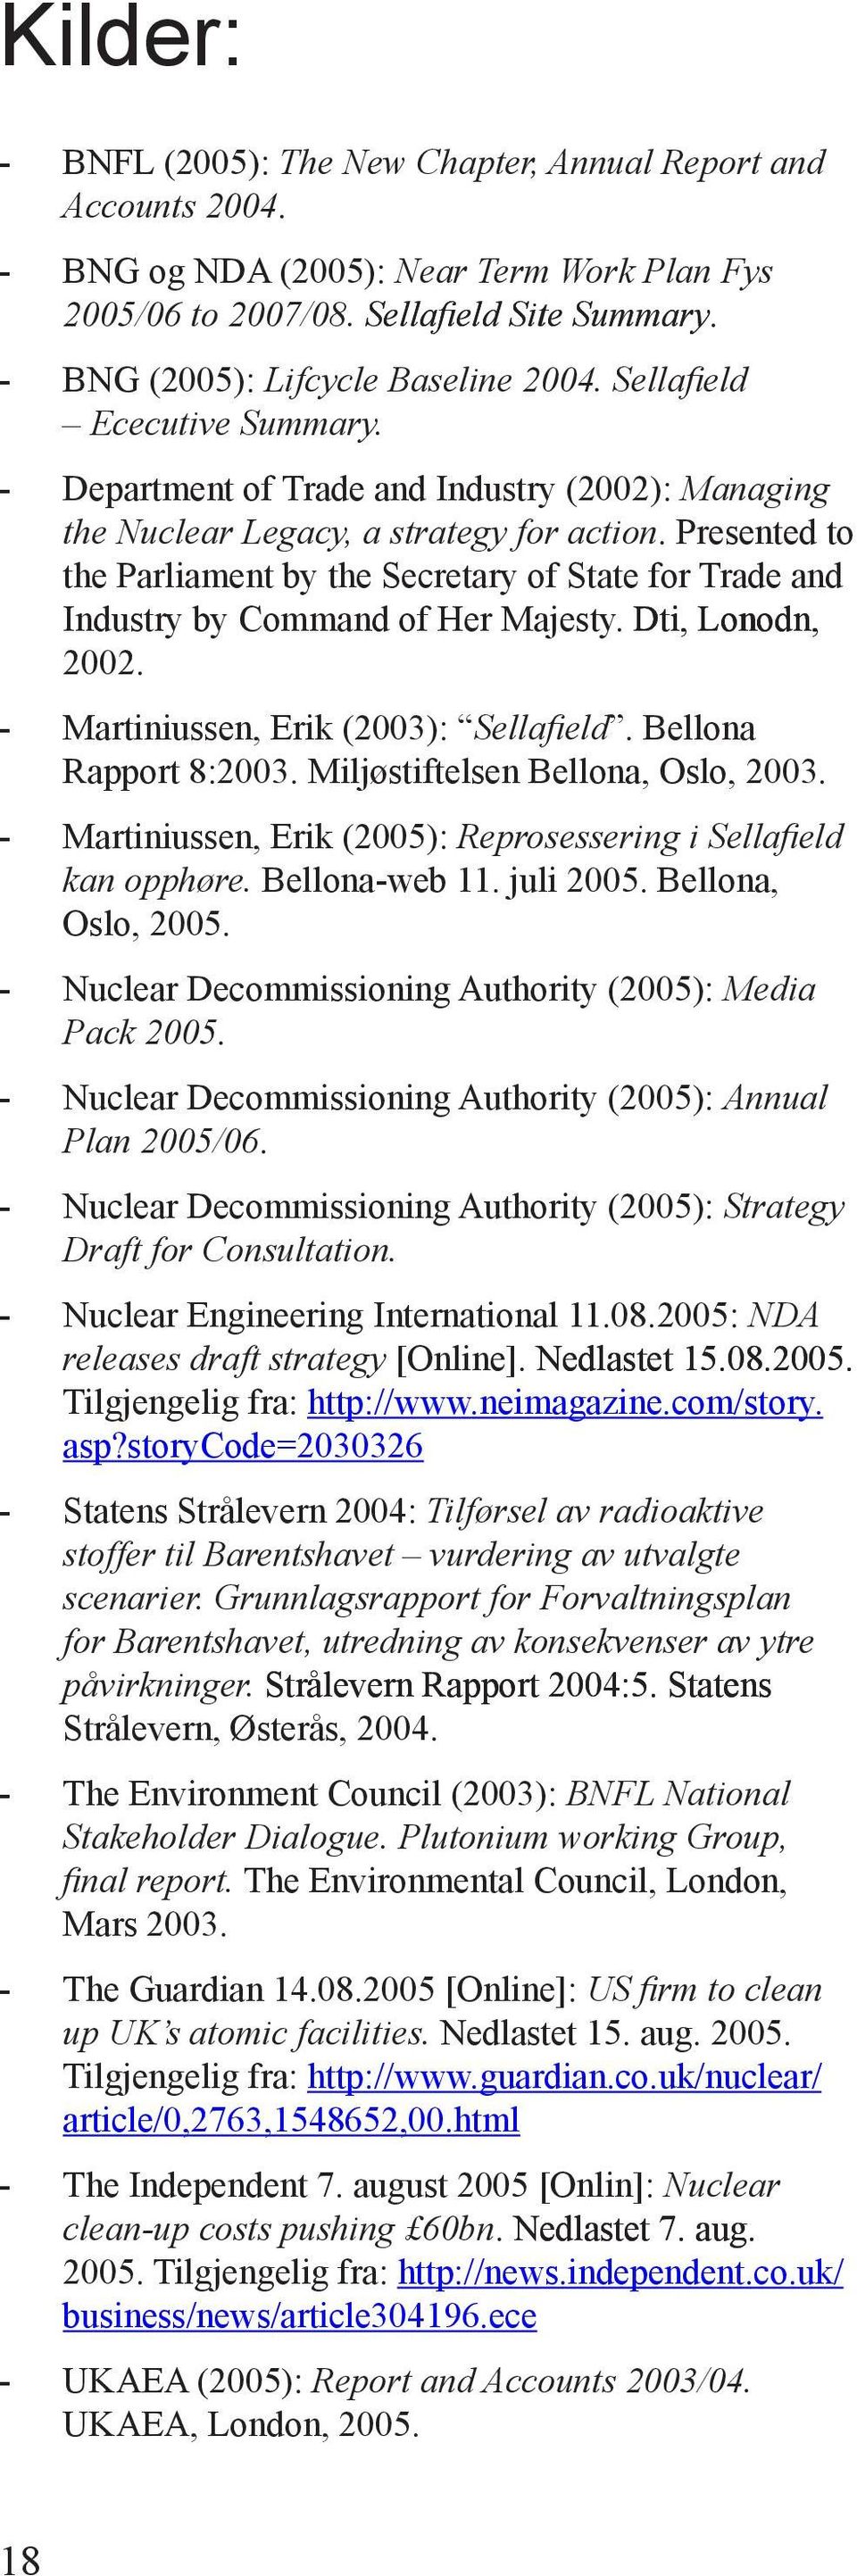 Presented to the Parliament by the Secretary of State for Trade and Industry by Command of Her Majesty. Dti, Lonodn, 2002. - Martiniussen, Erik (2003):. Bellona Rapport 8:2003.